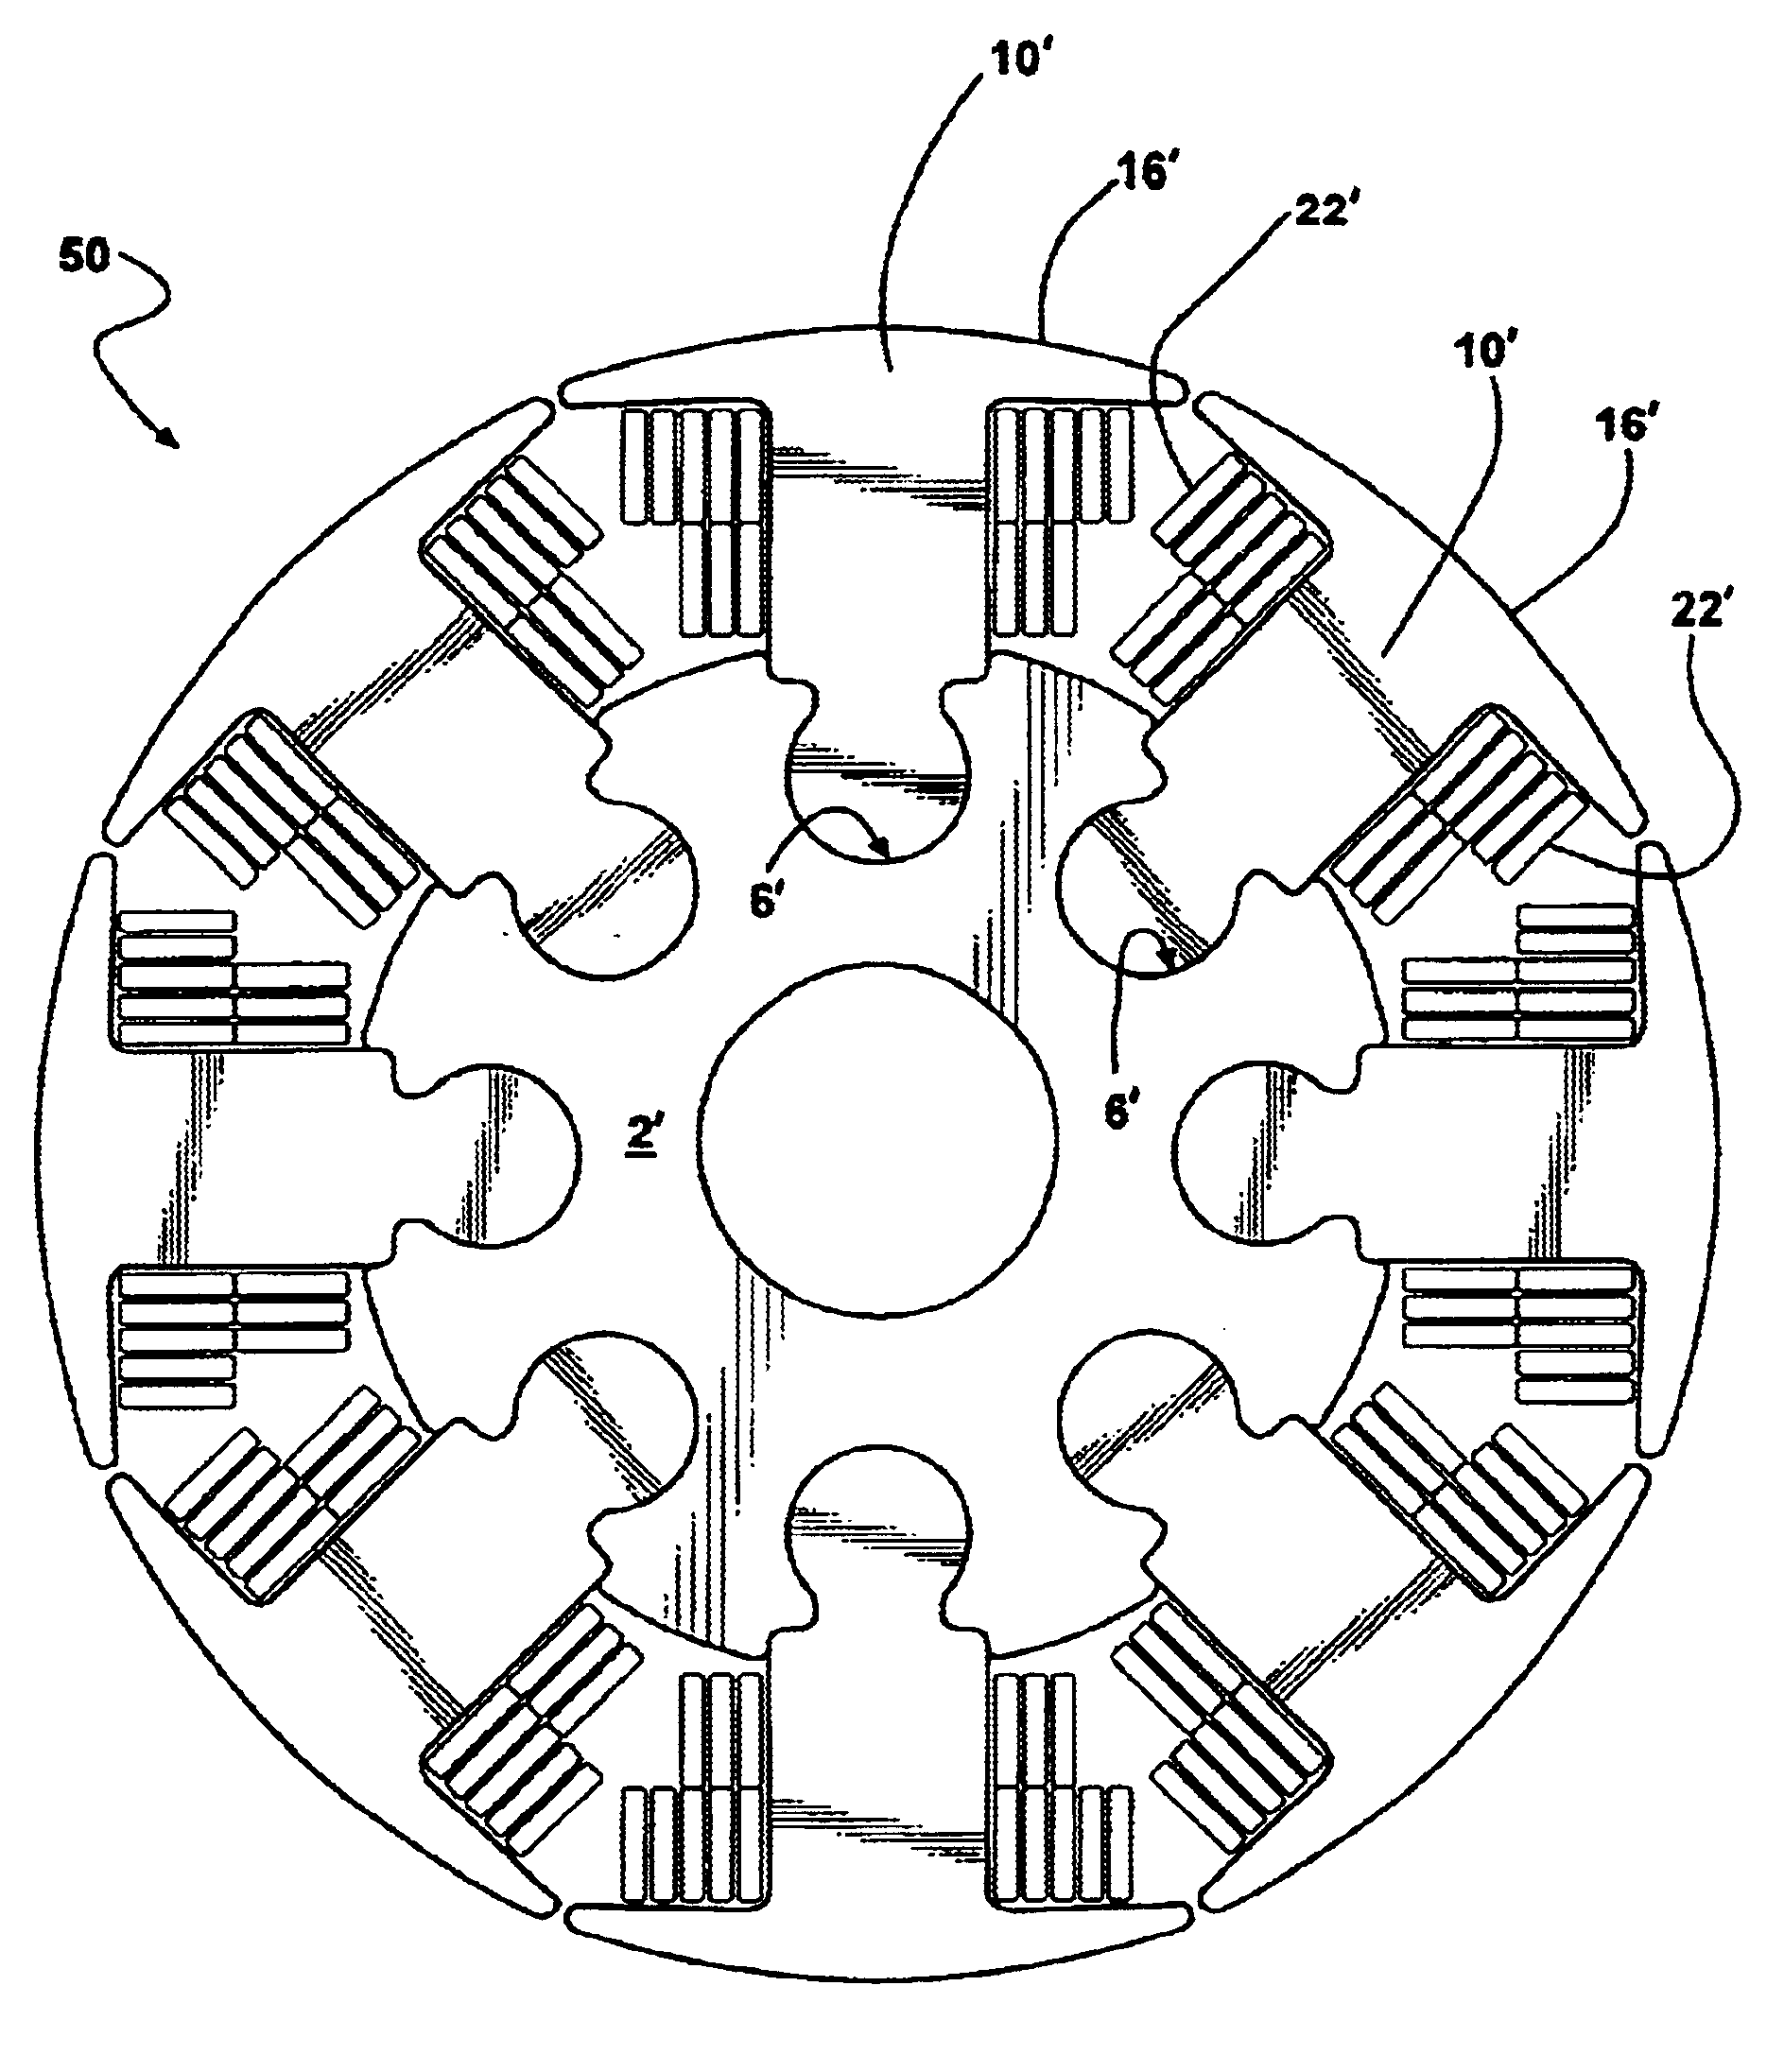 Electrical machine construction using axially inserted teeth in a stator ring or armature